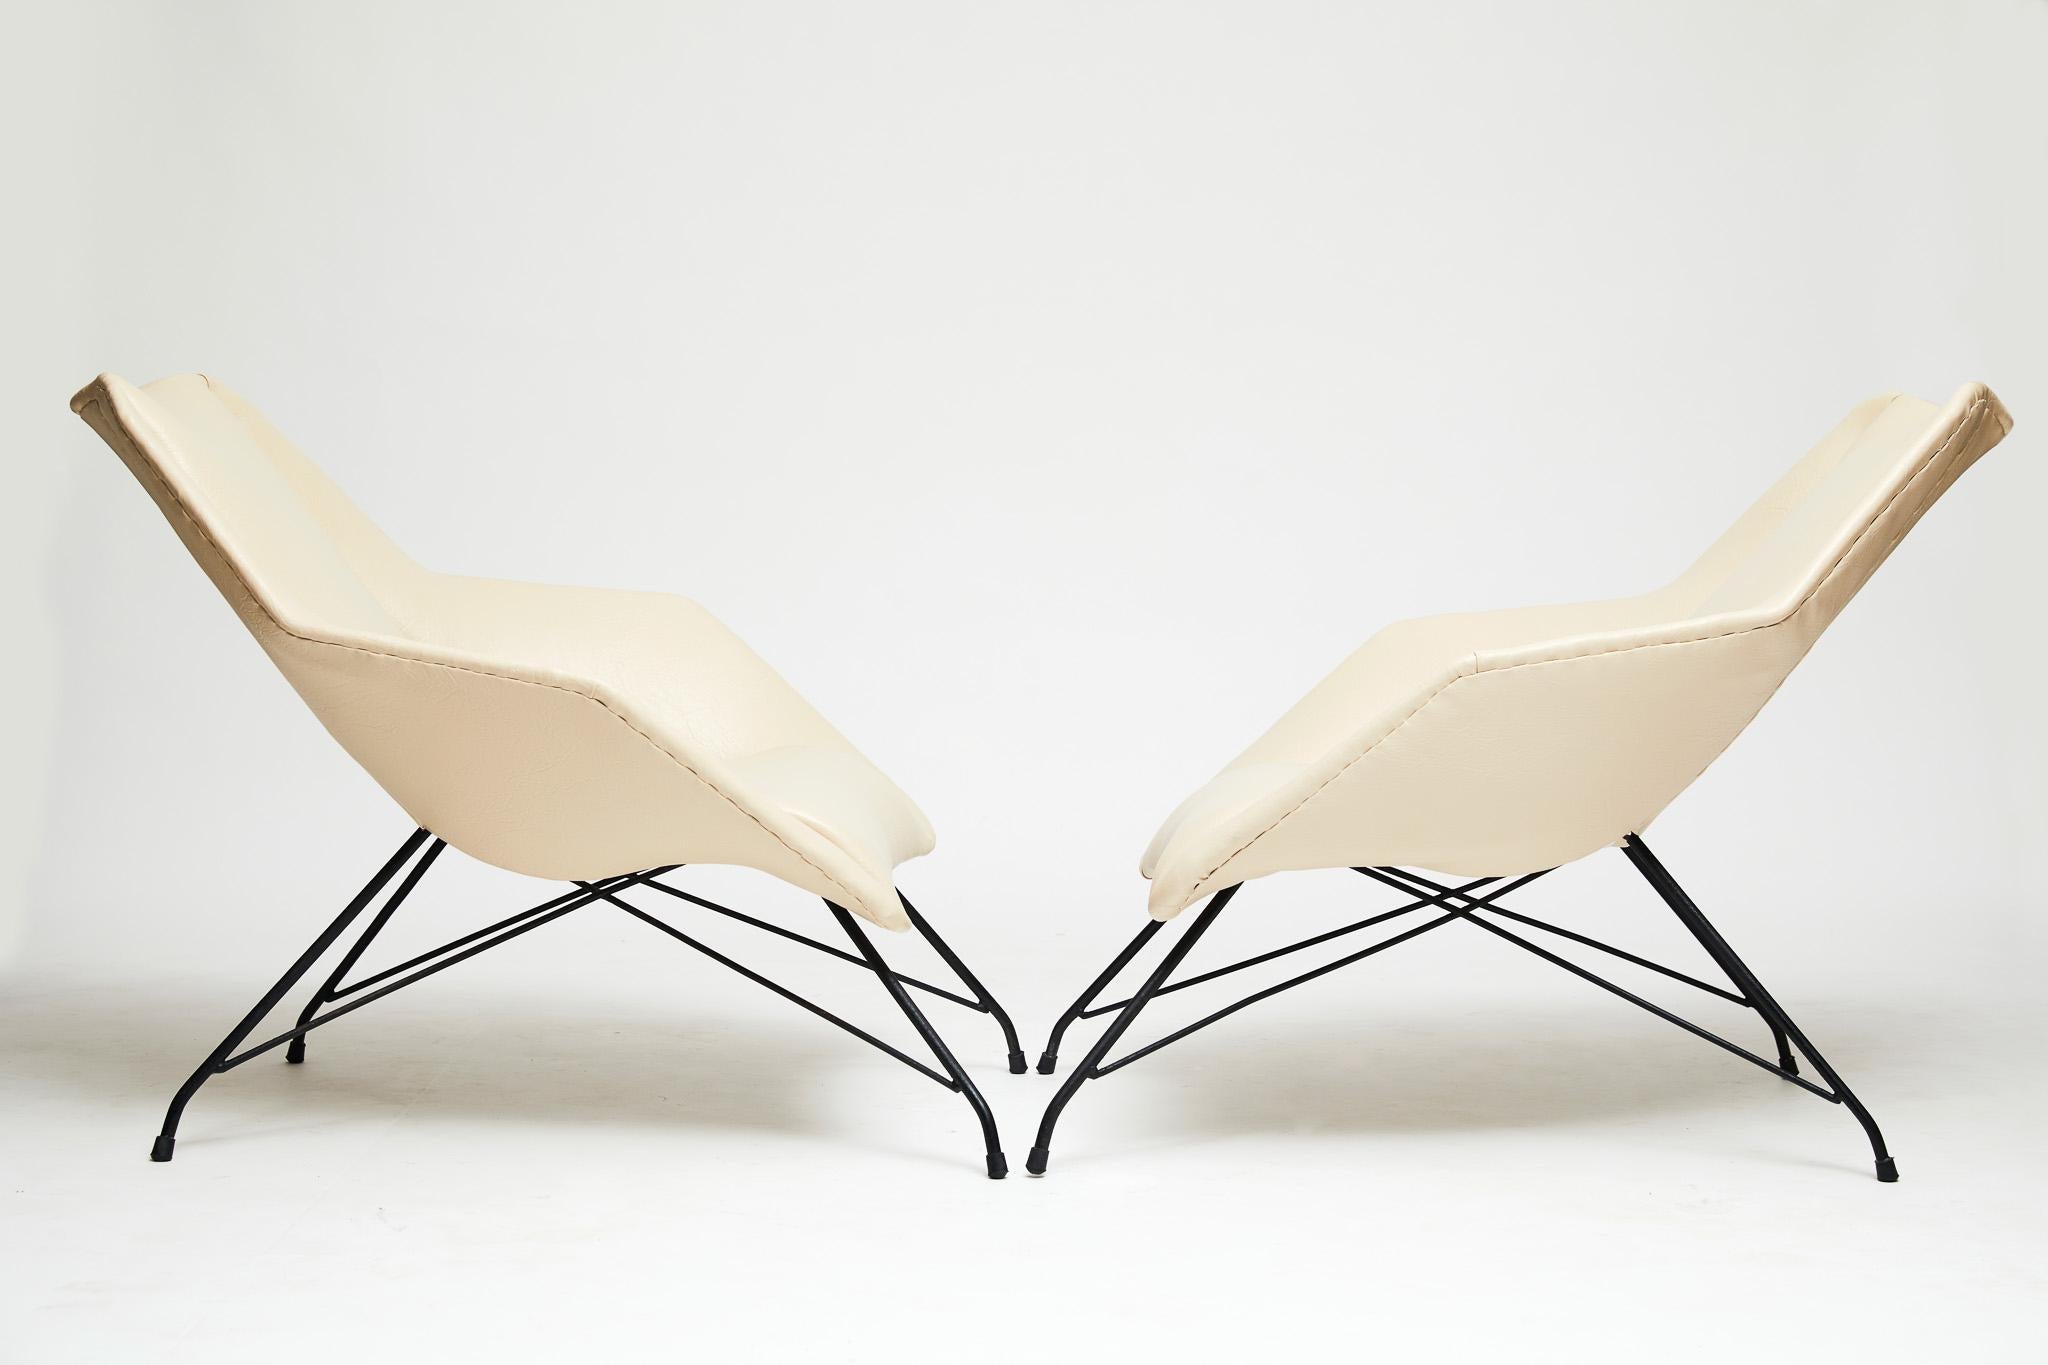 Midcentury Armchairs in White Leather & Iron Base by Carlo Hauner, 1955, Brazil For Sale 1